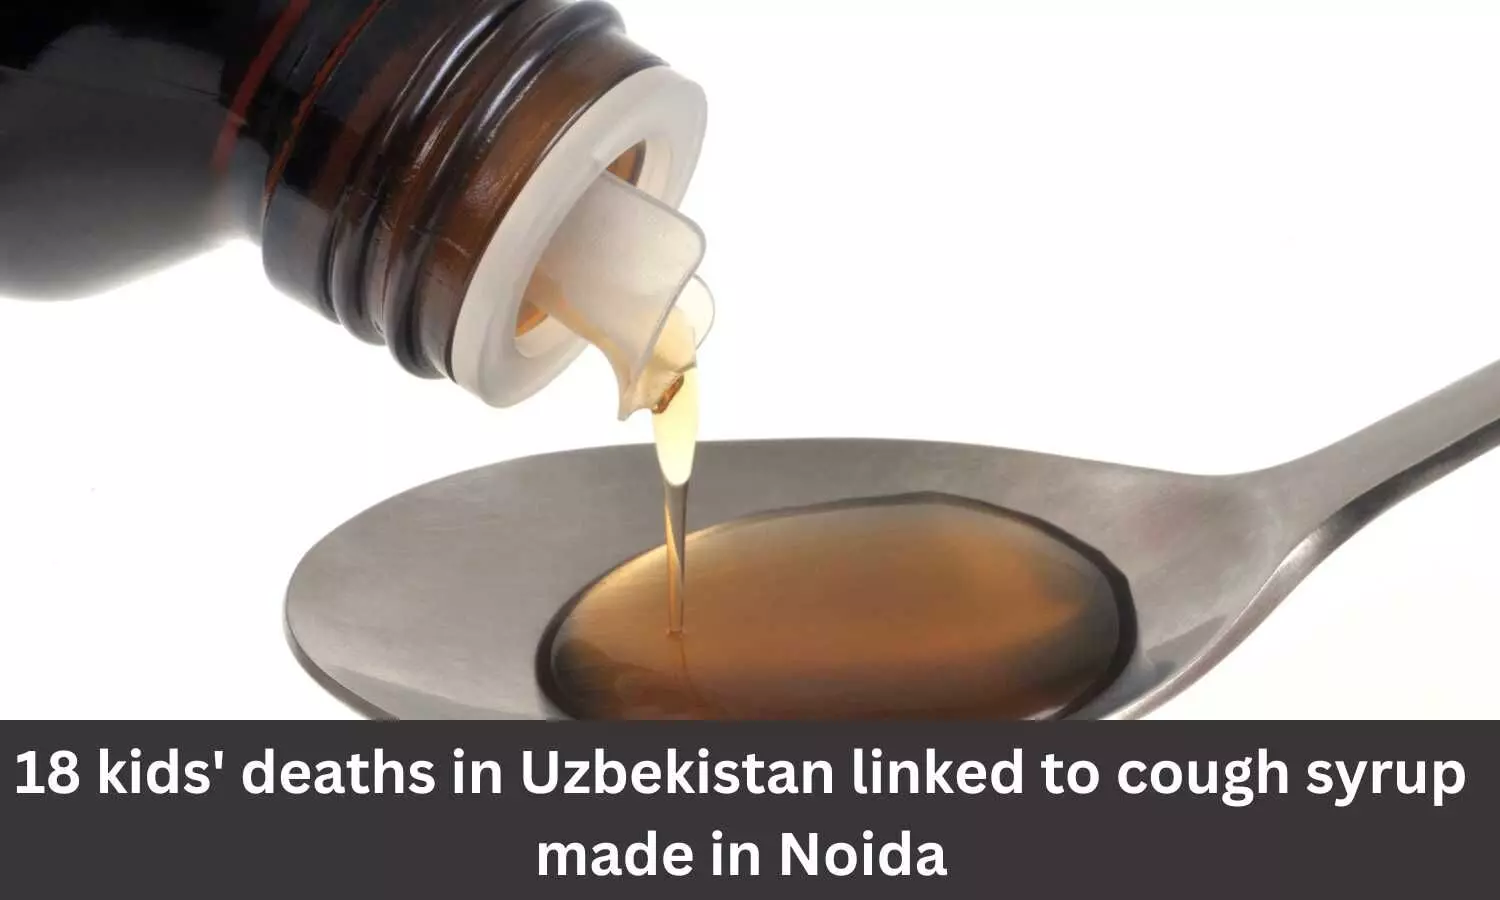 Marion Biotech stops production of cough syrup linked to death of 18 kids in Uzbekistan